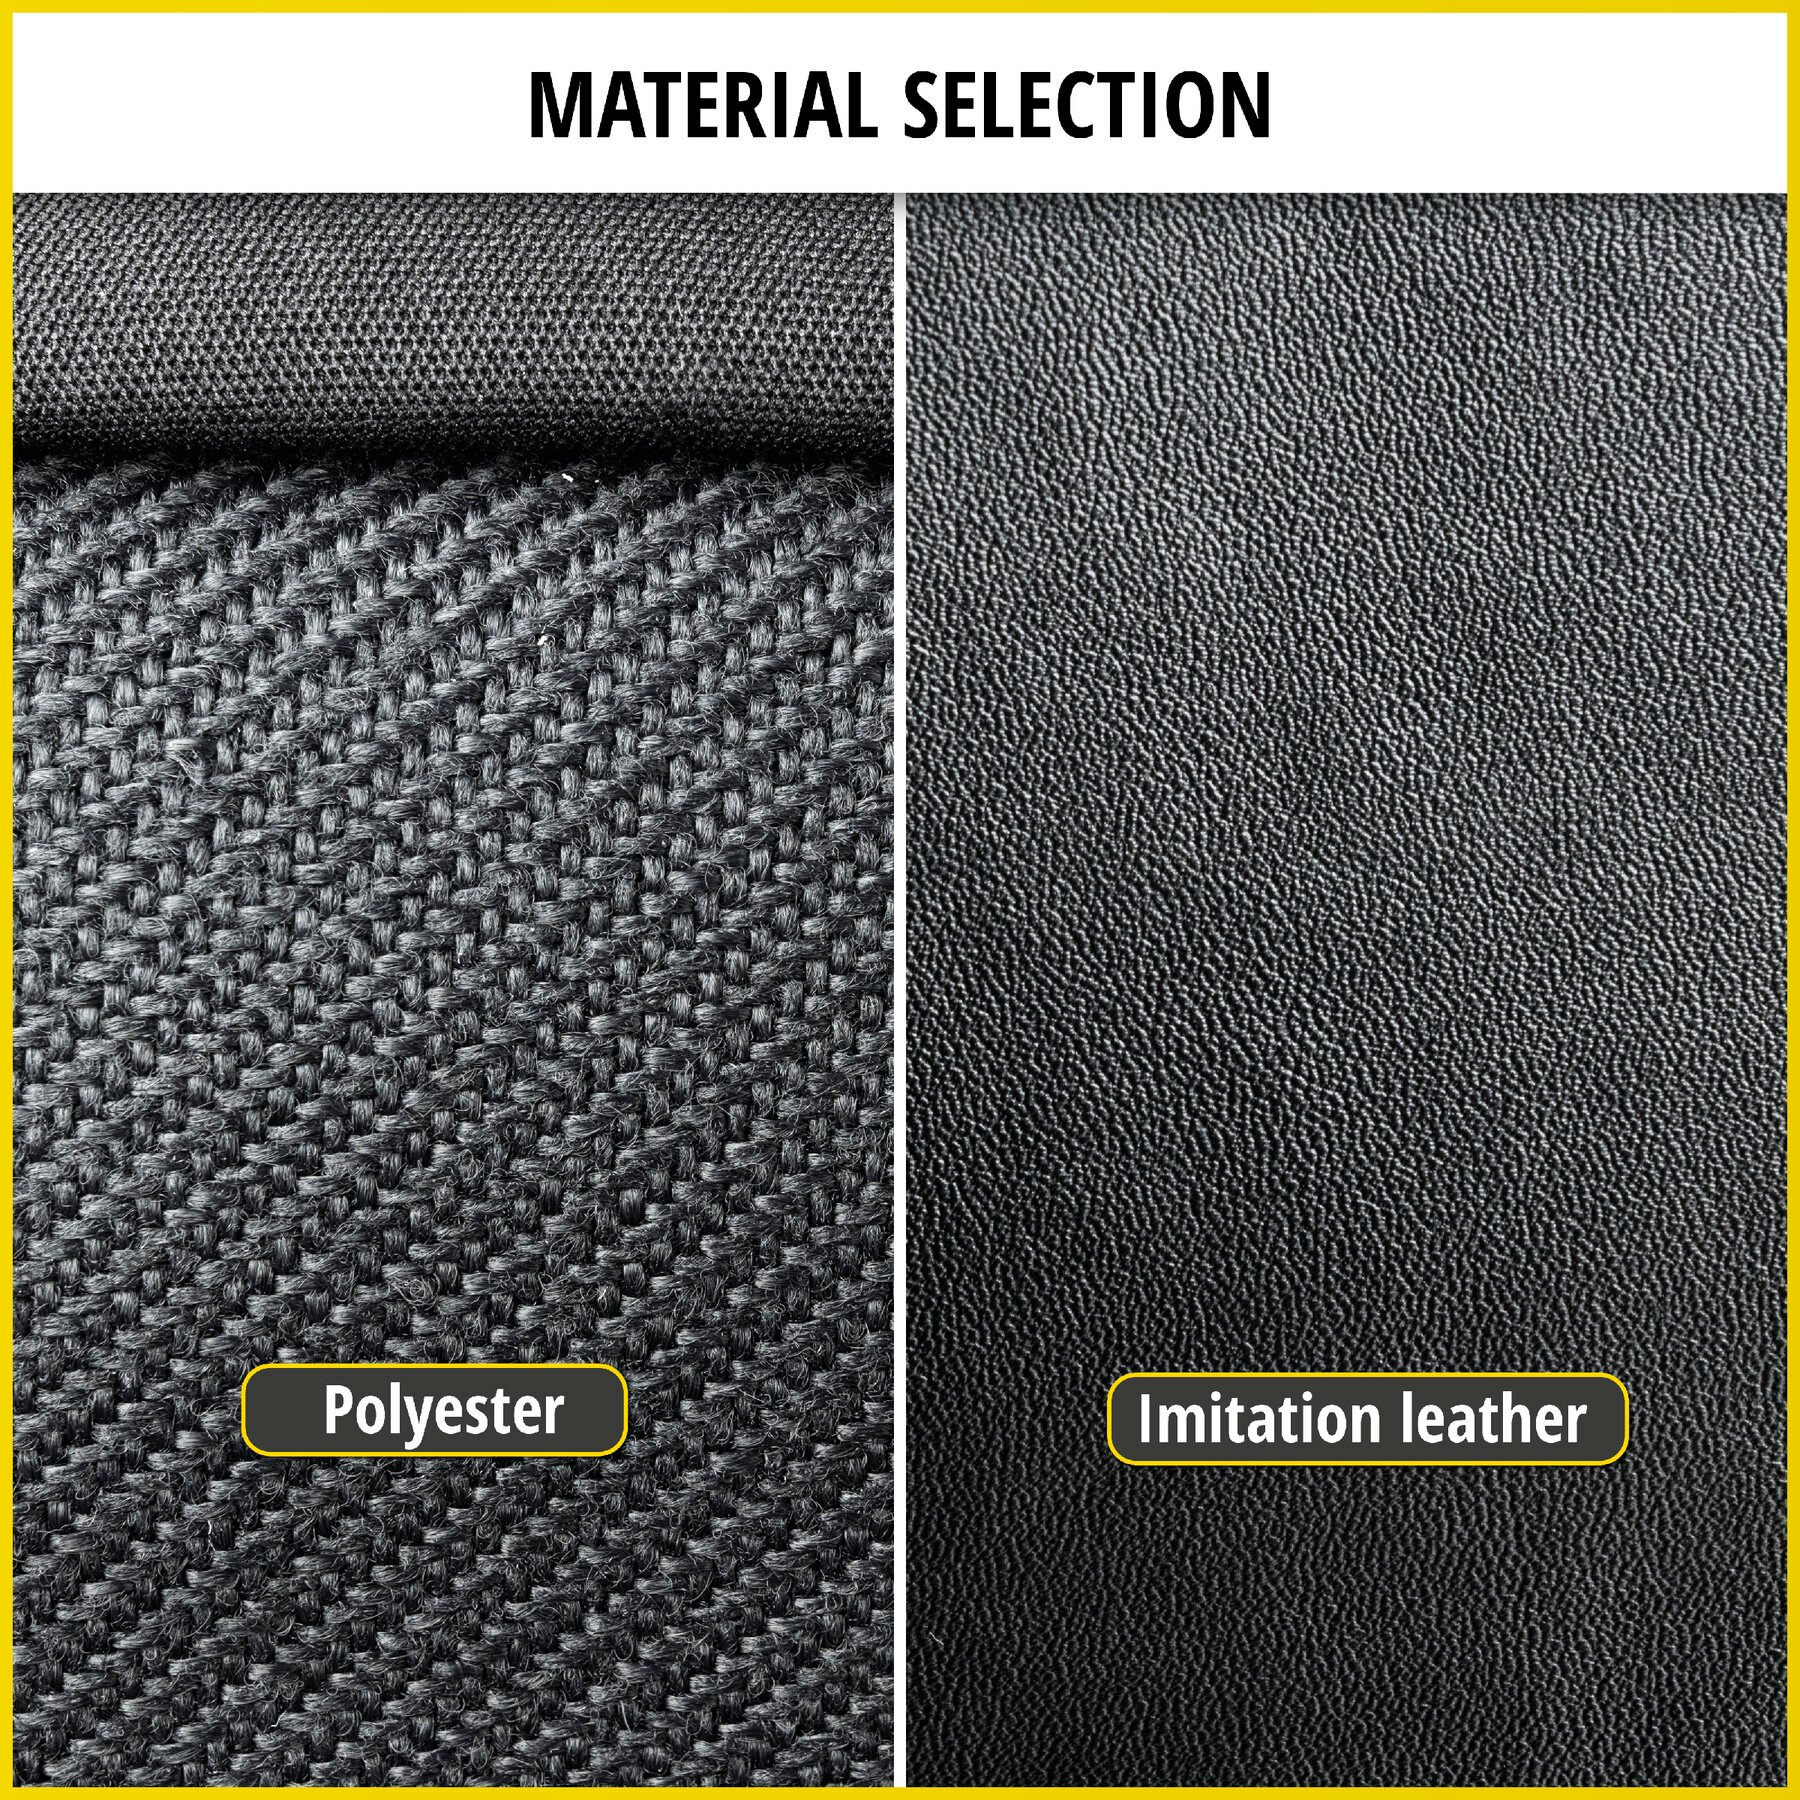 Seat cover made of imitation leather for VW T4, single seat cover front